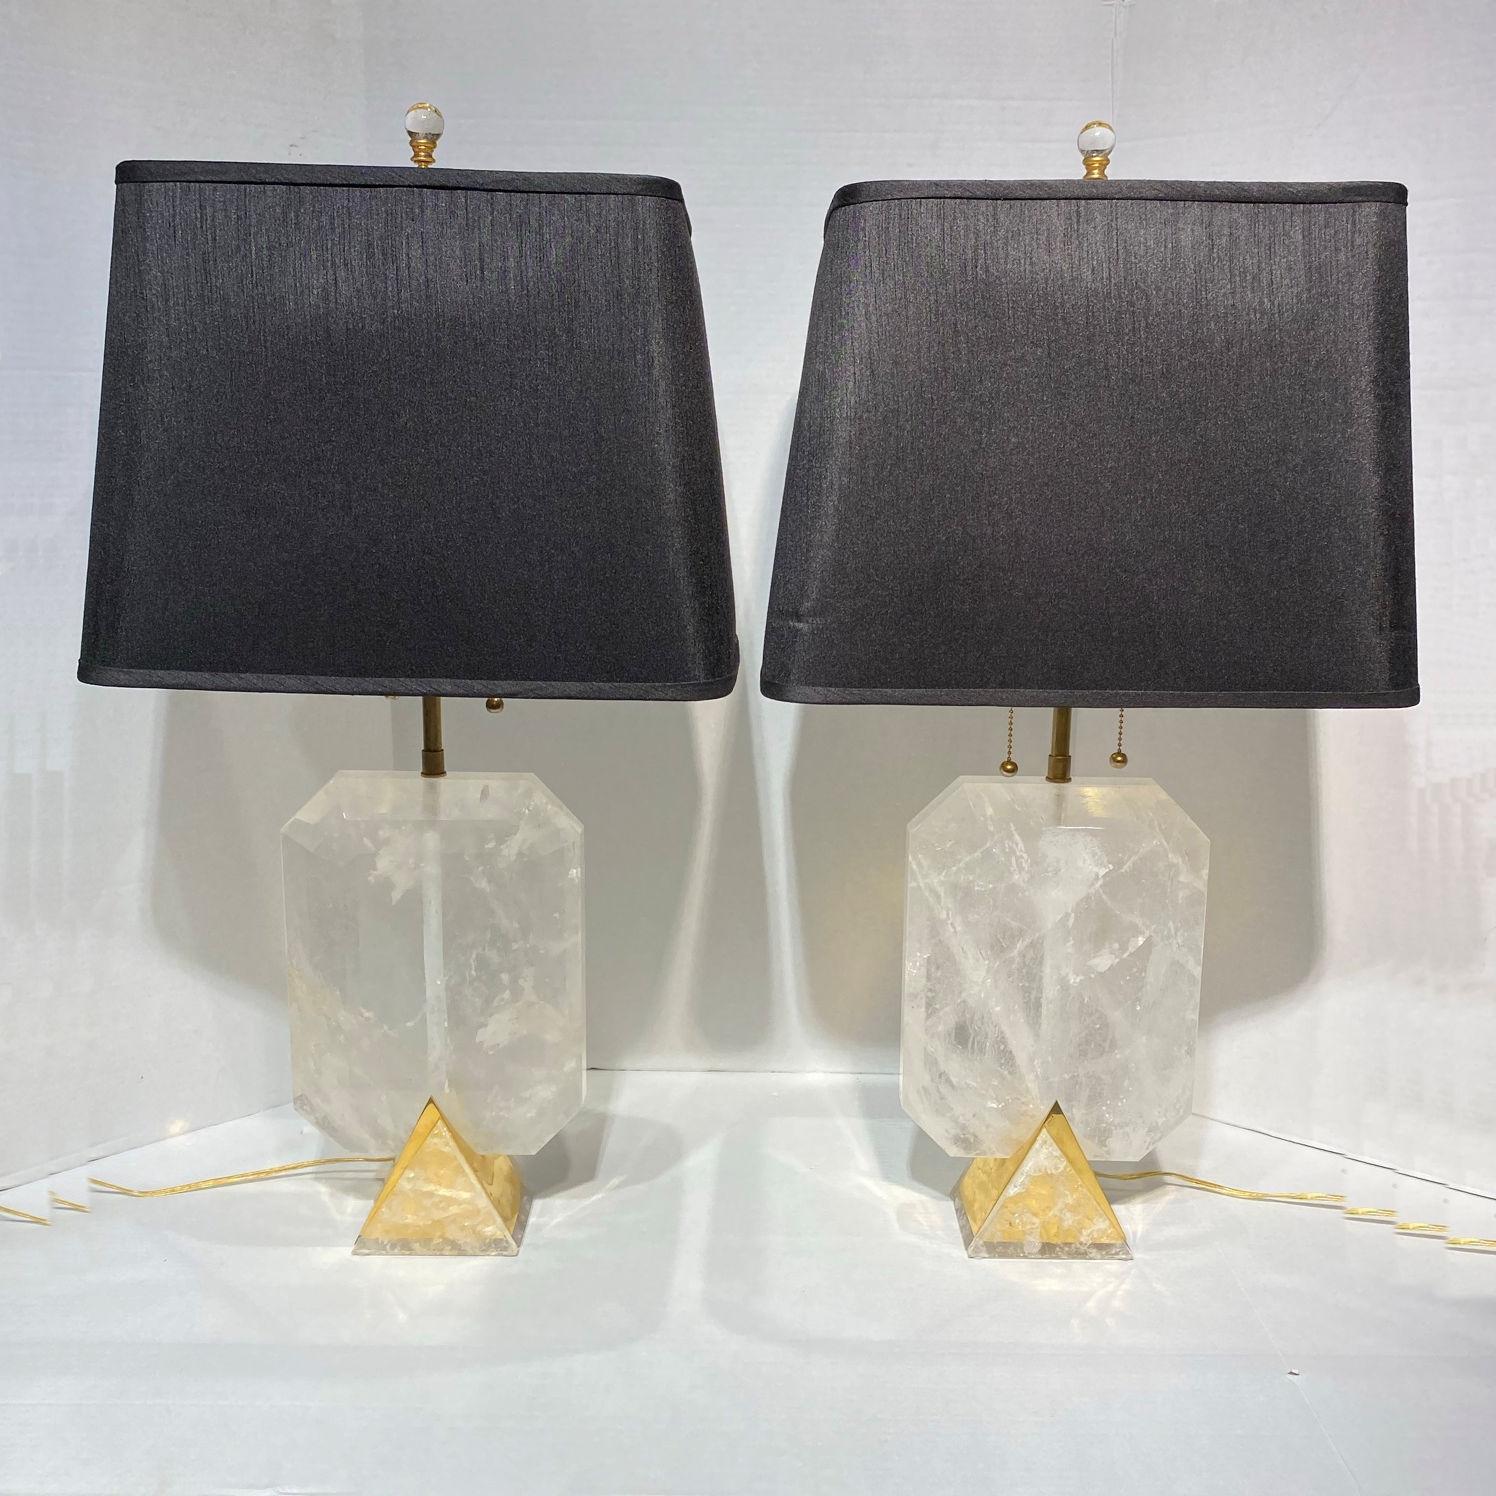 Vintage rock crystal and brass table lamps.